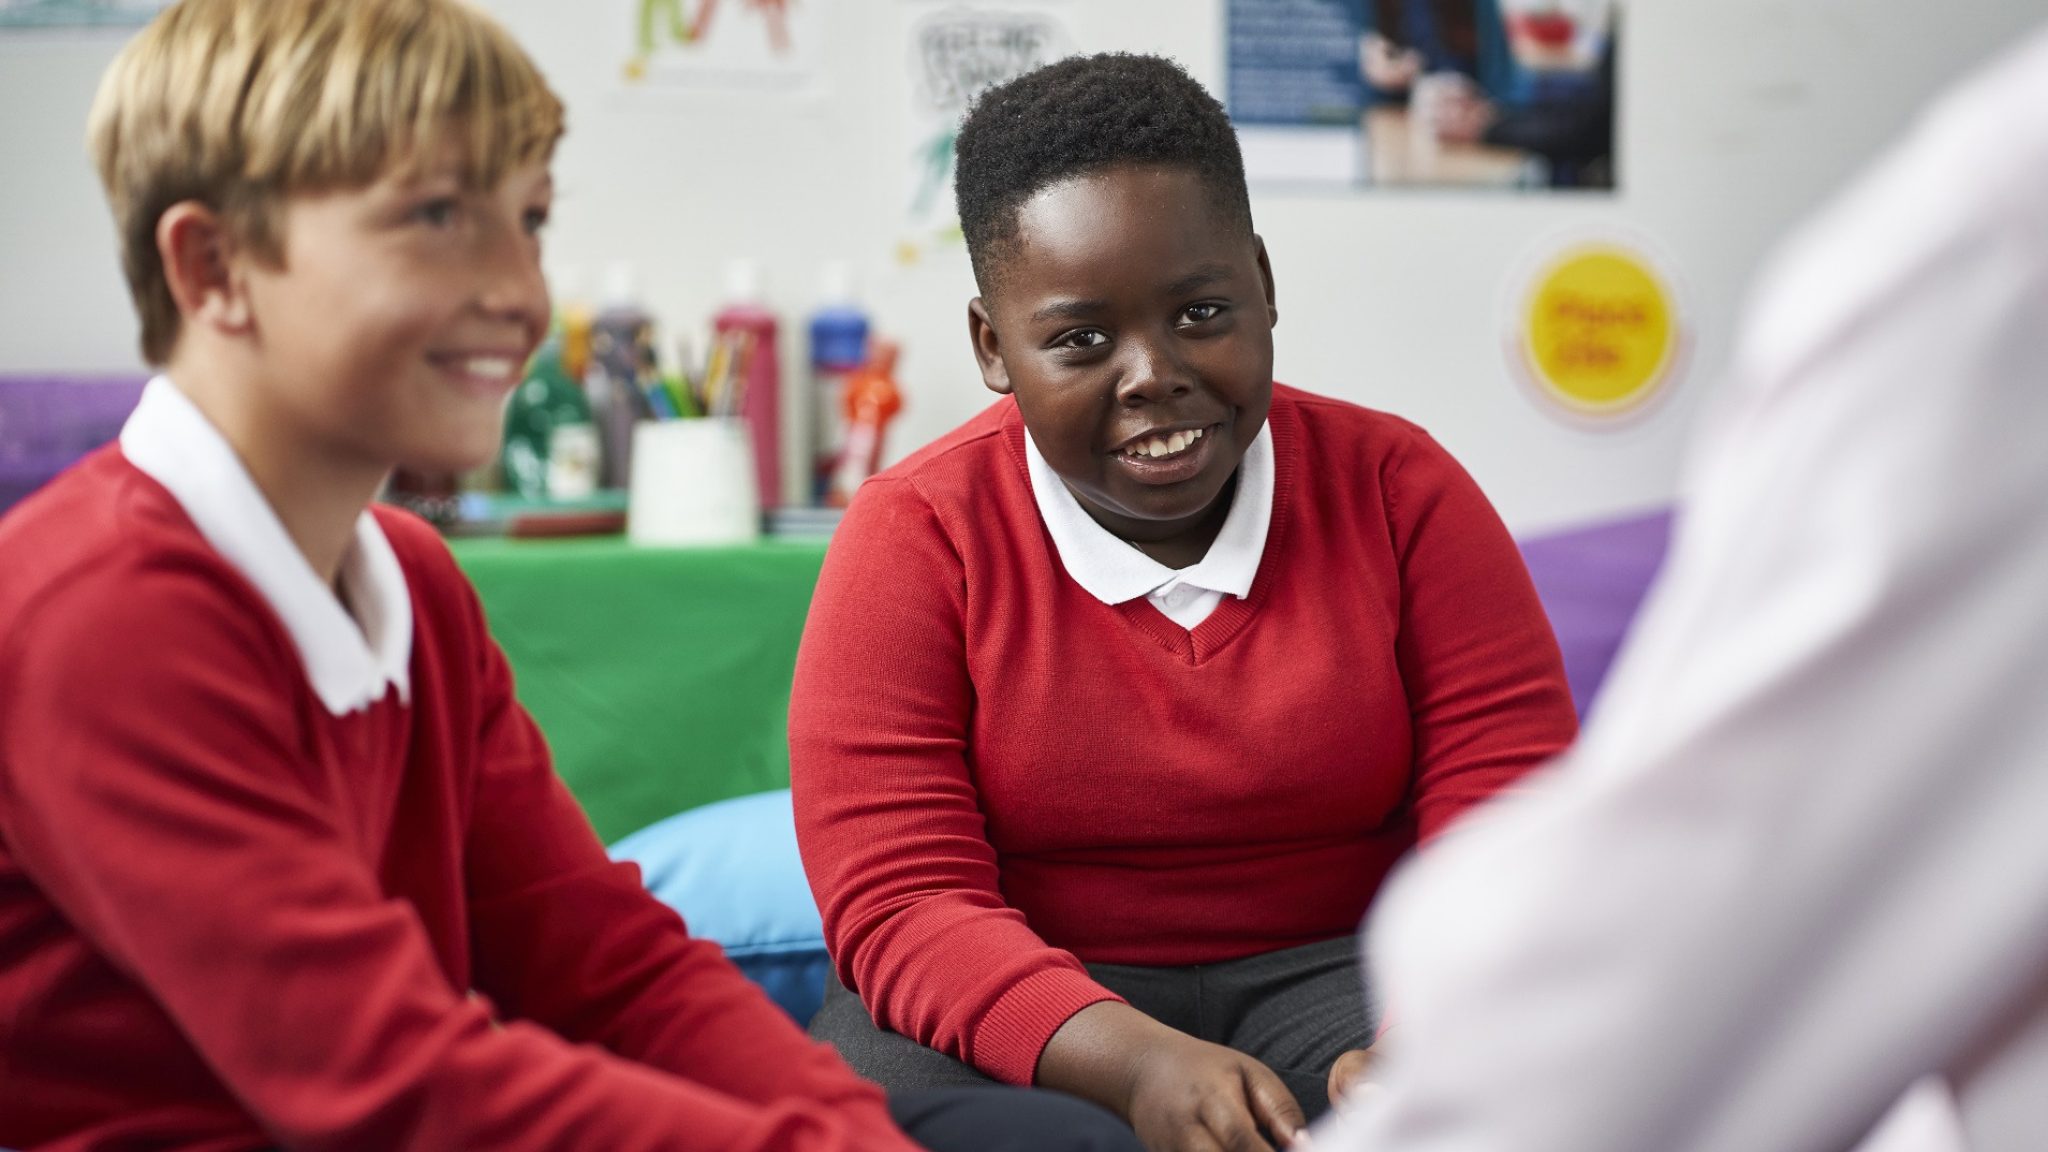 Two boys wearing red jumpers and smiling sit in a classroom talking to an adult whose back is to the camera